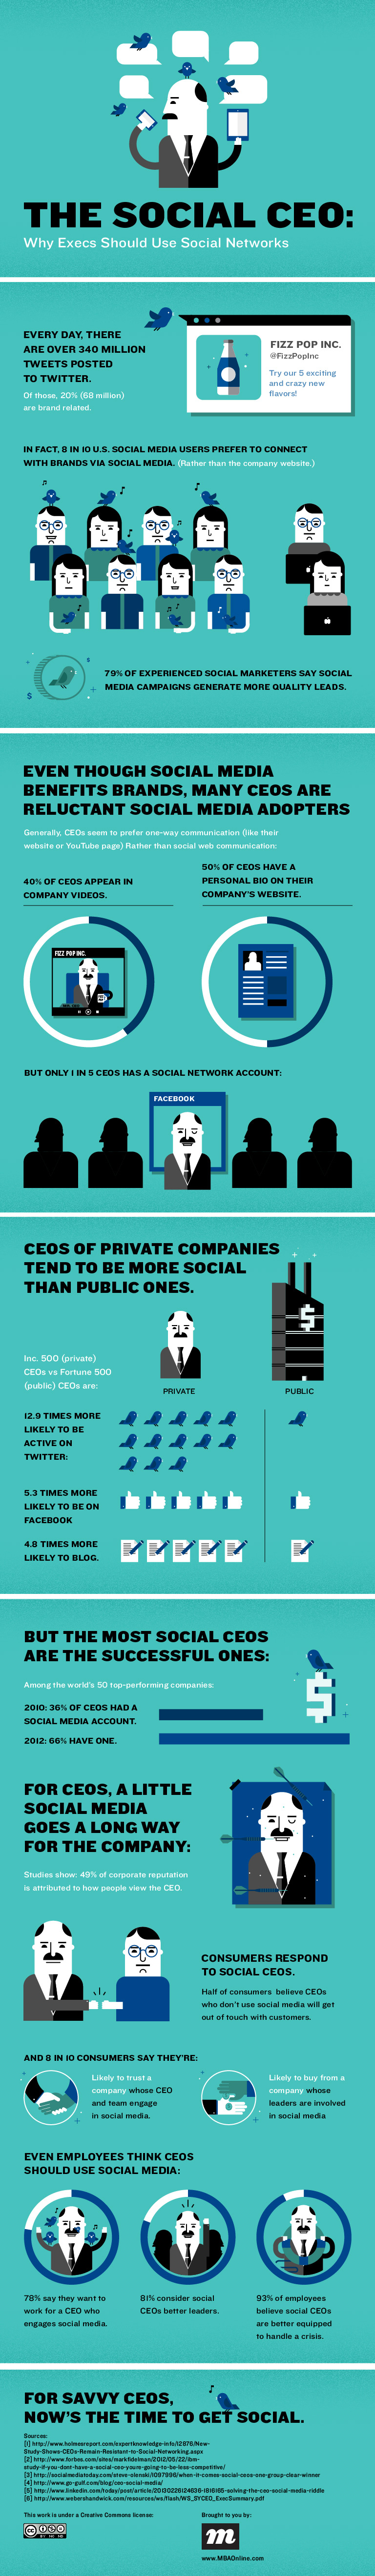 Infographie 38 - Social media and CEO benefits